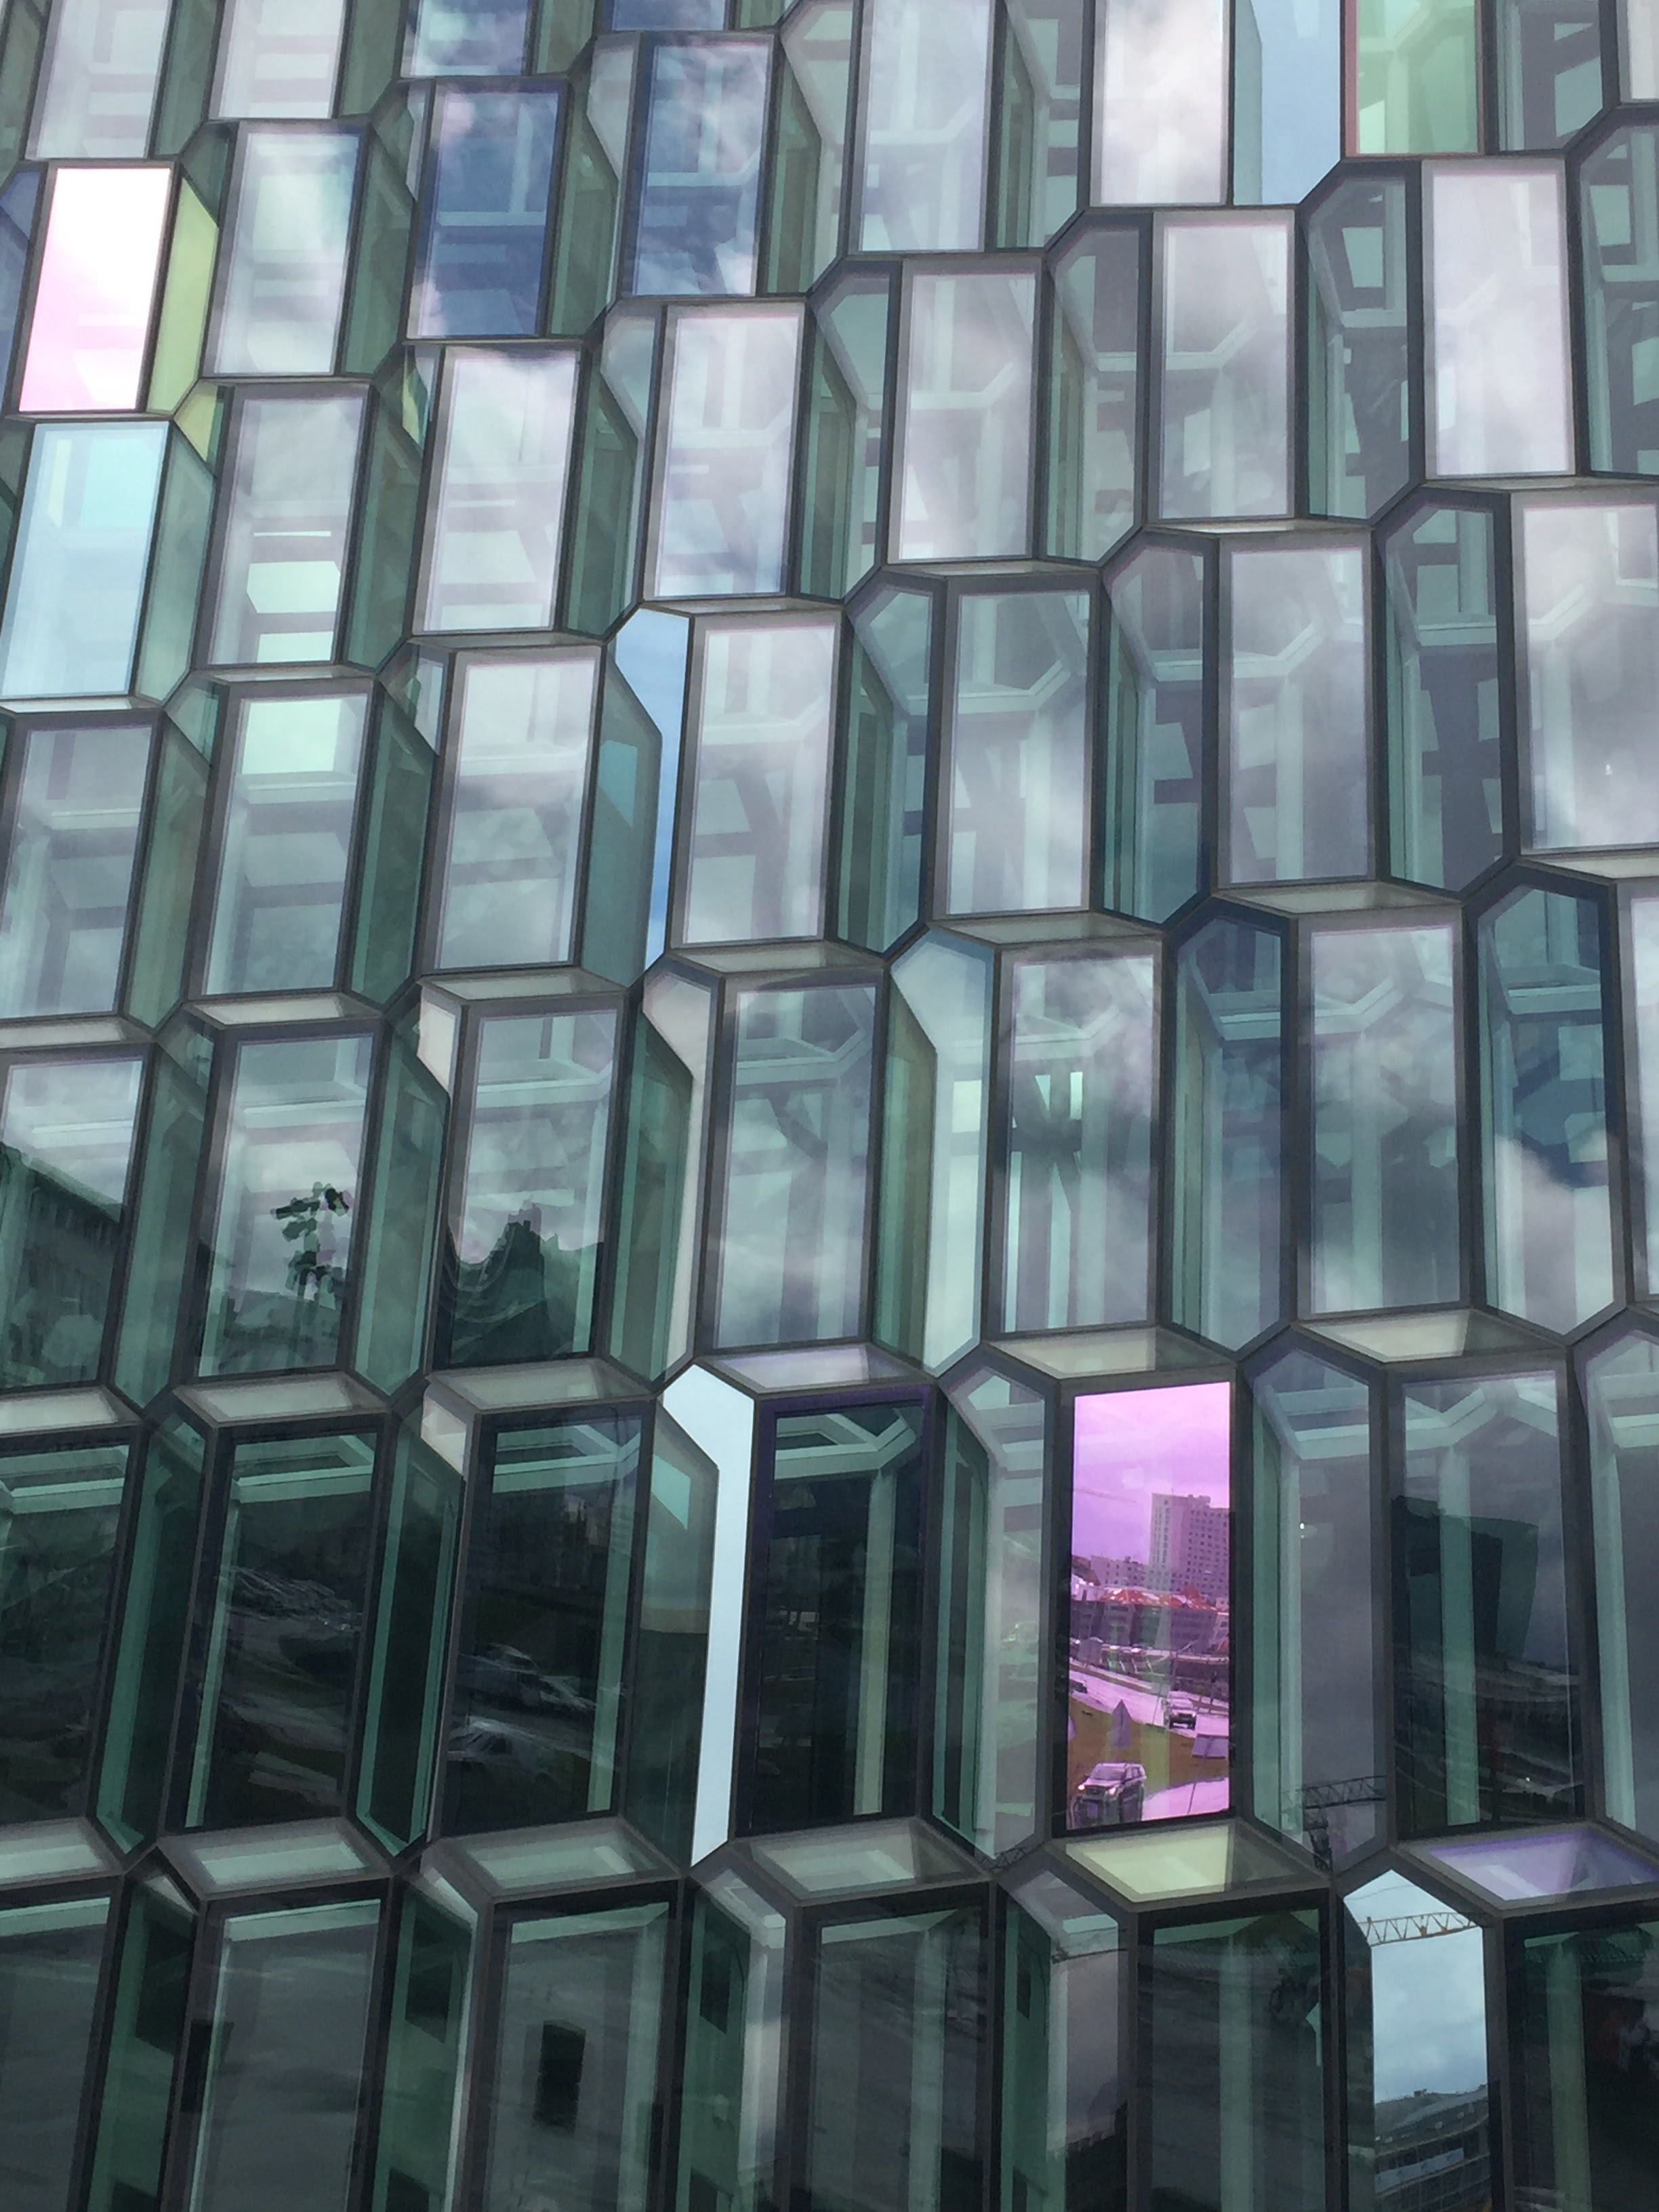 Harpa Concert Hall and Conference Center